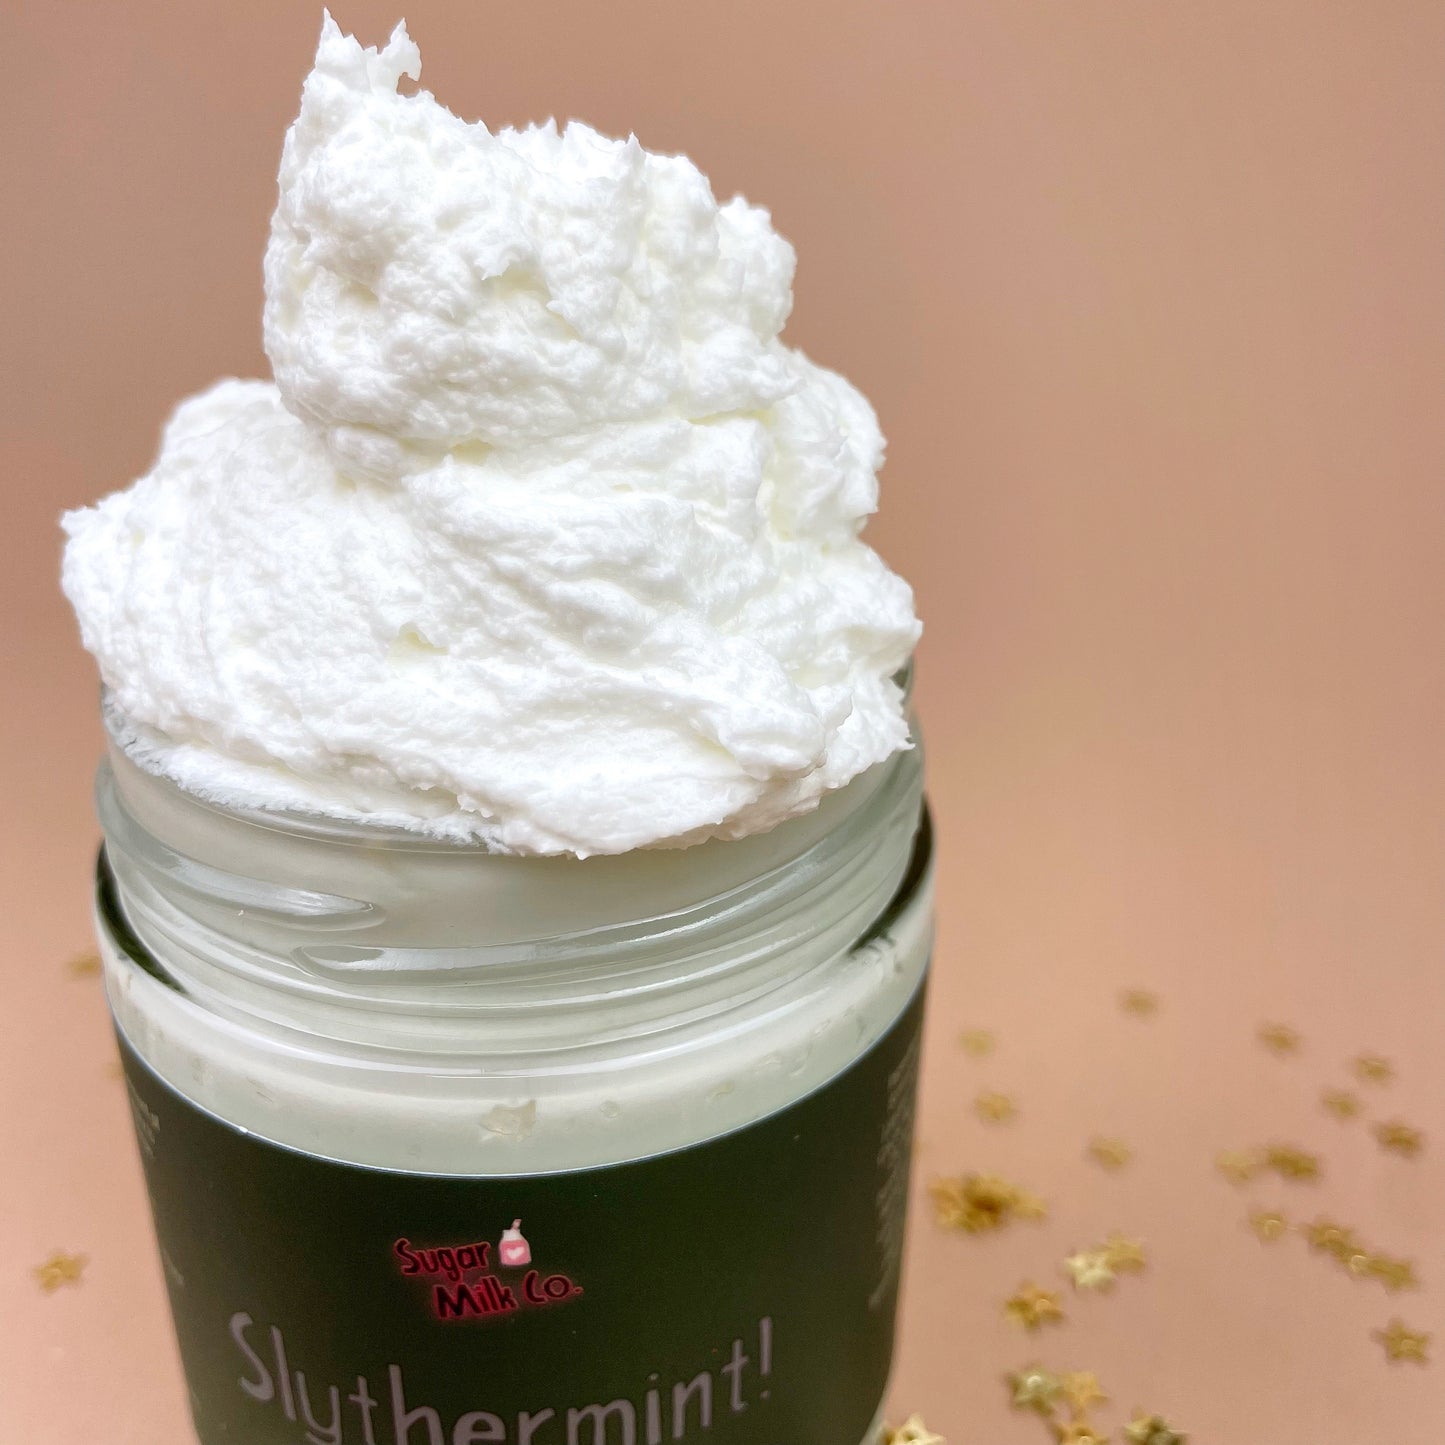 Slythermint Whipped Soap